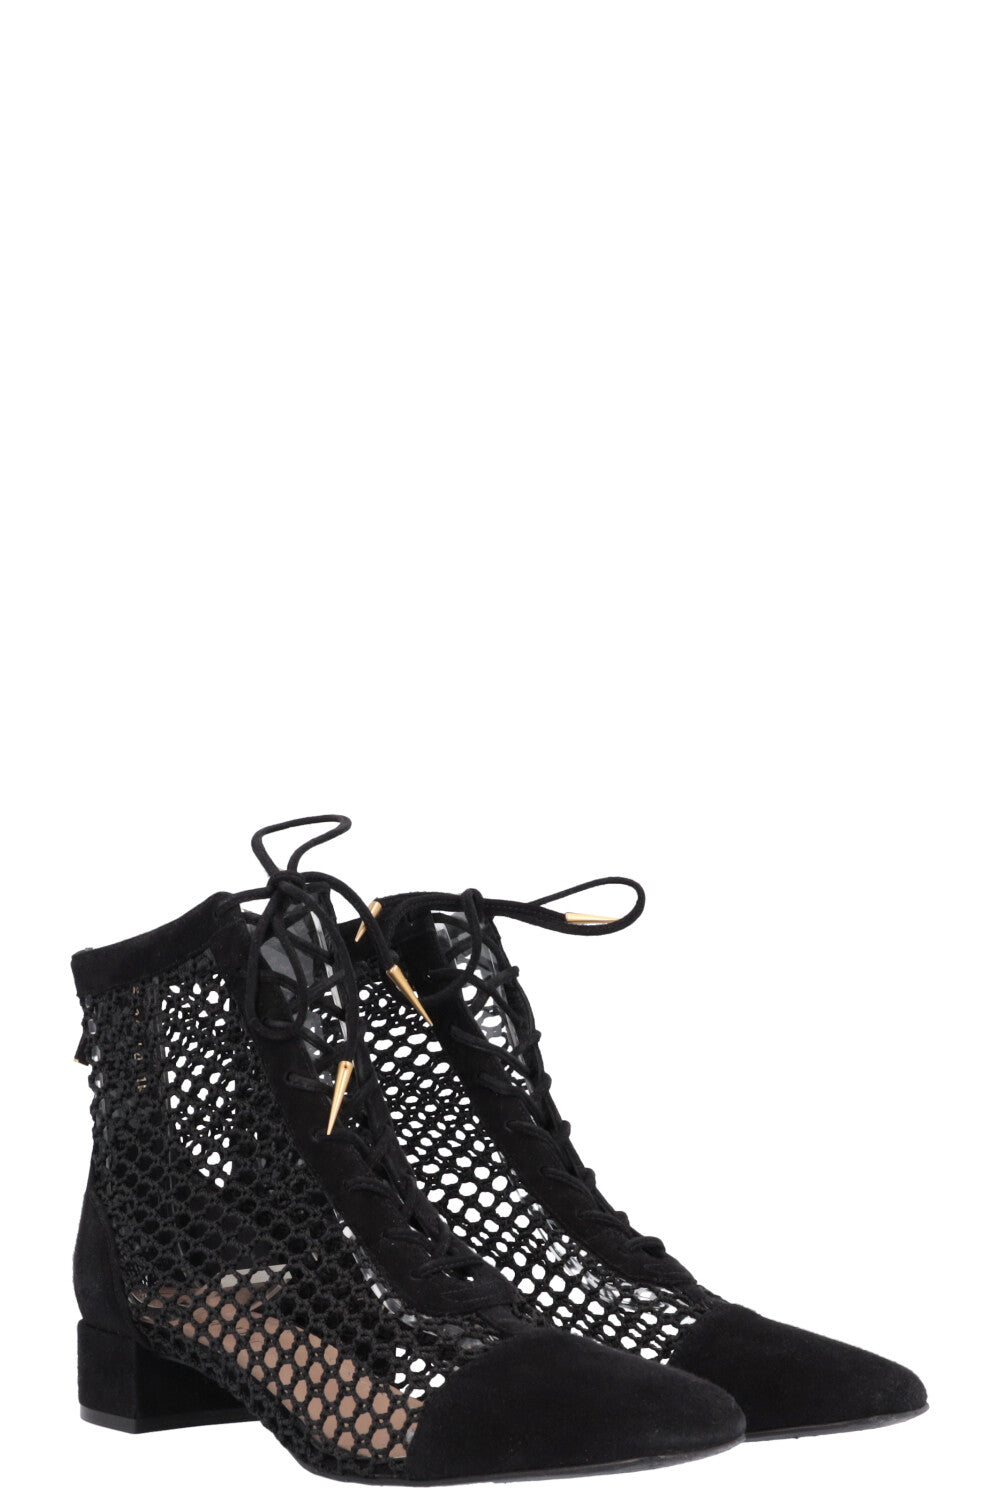 CHRISTIAN_DIOR_Naughtily-D_Boots